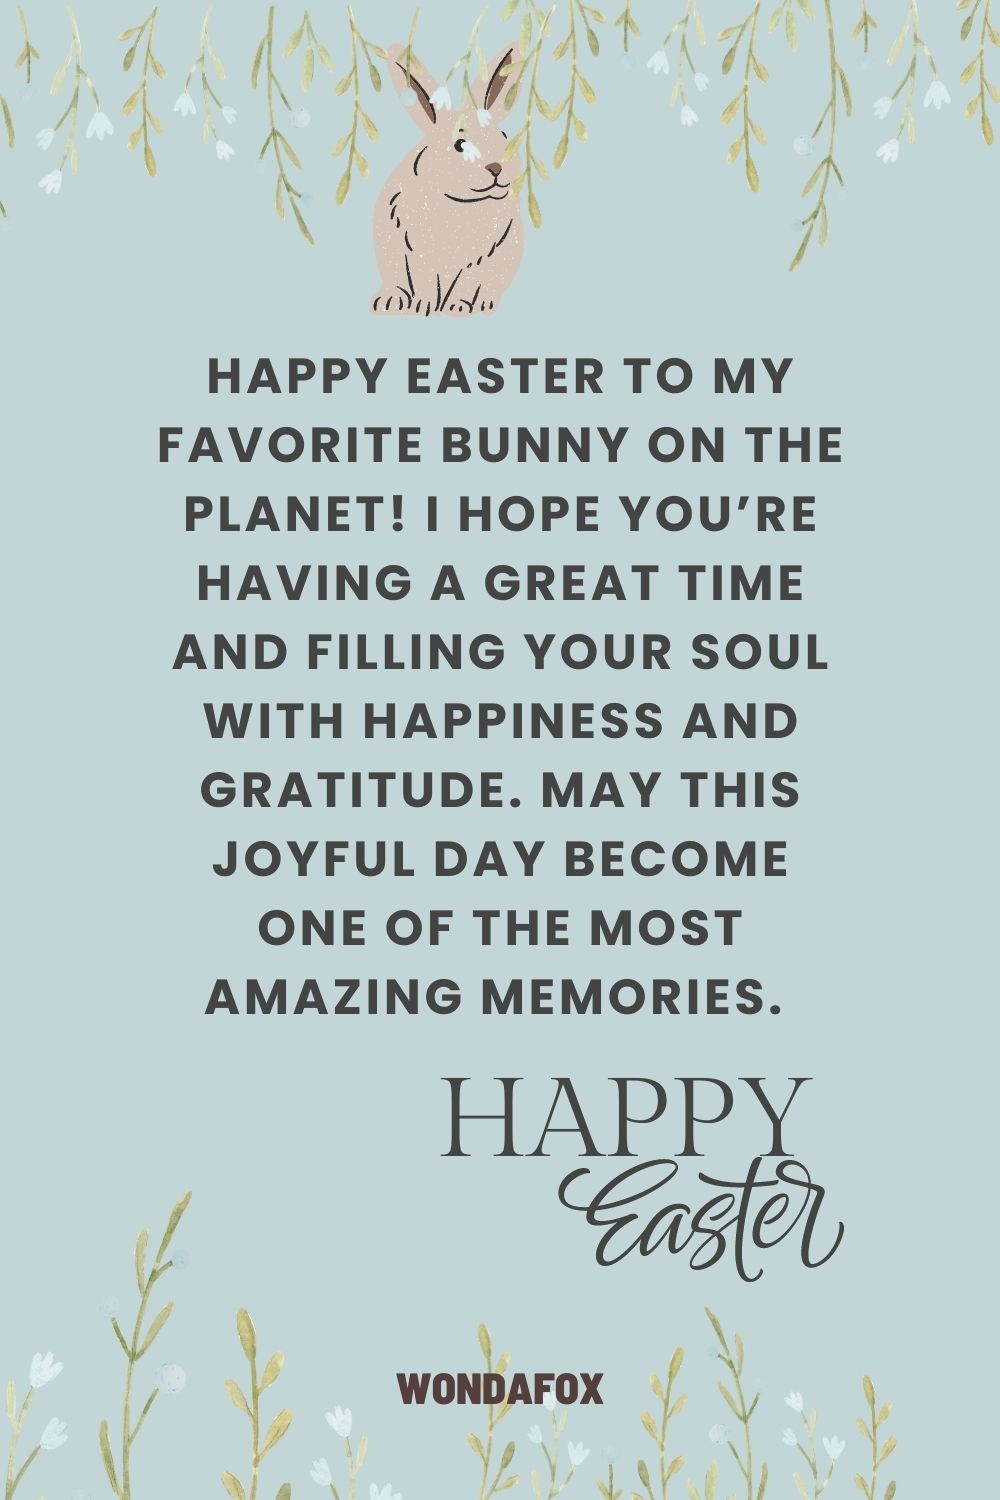 Happy Easter to my favorite bunny on the planet! I hope you’re having a great time and filling your soul with happiness and gratitude. May this joyful day become one of the most amazing memories. 